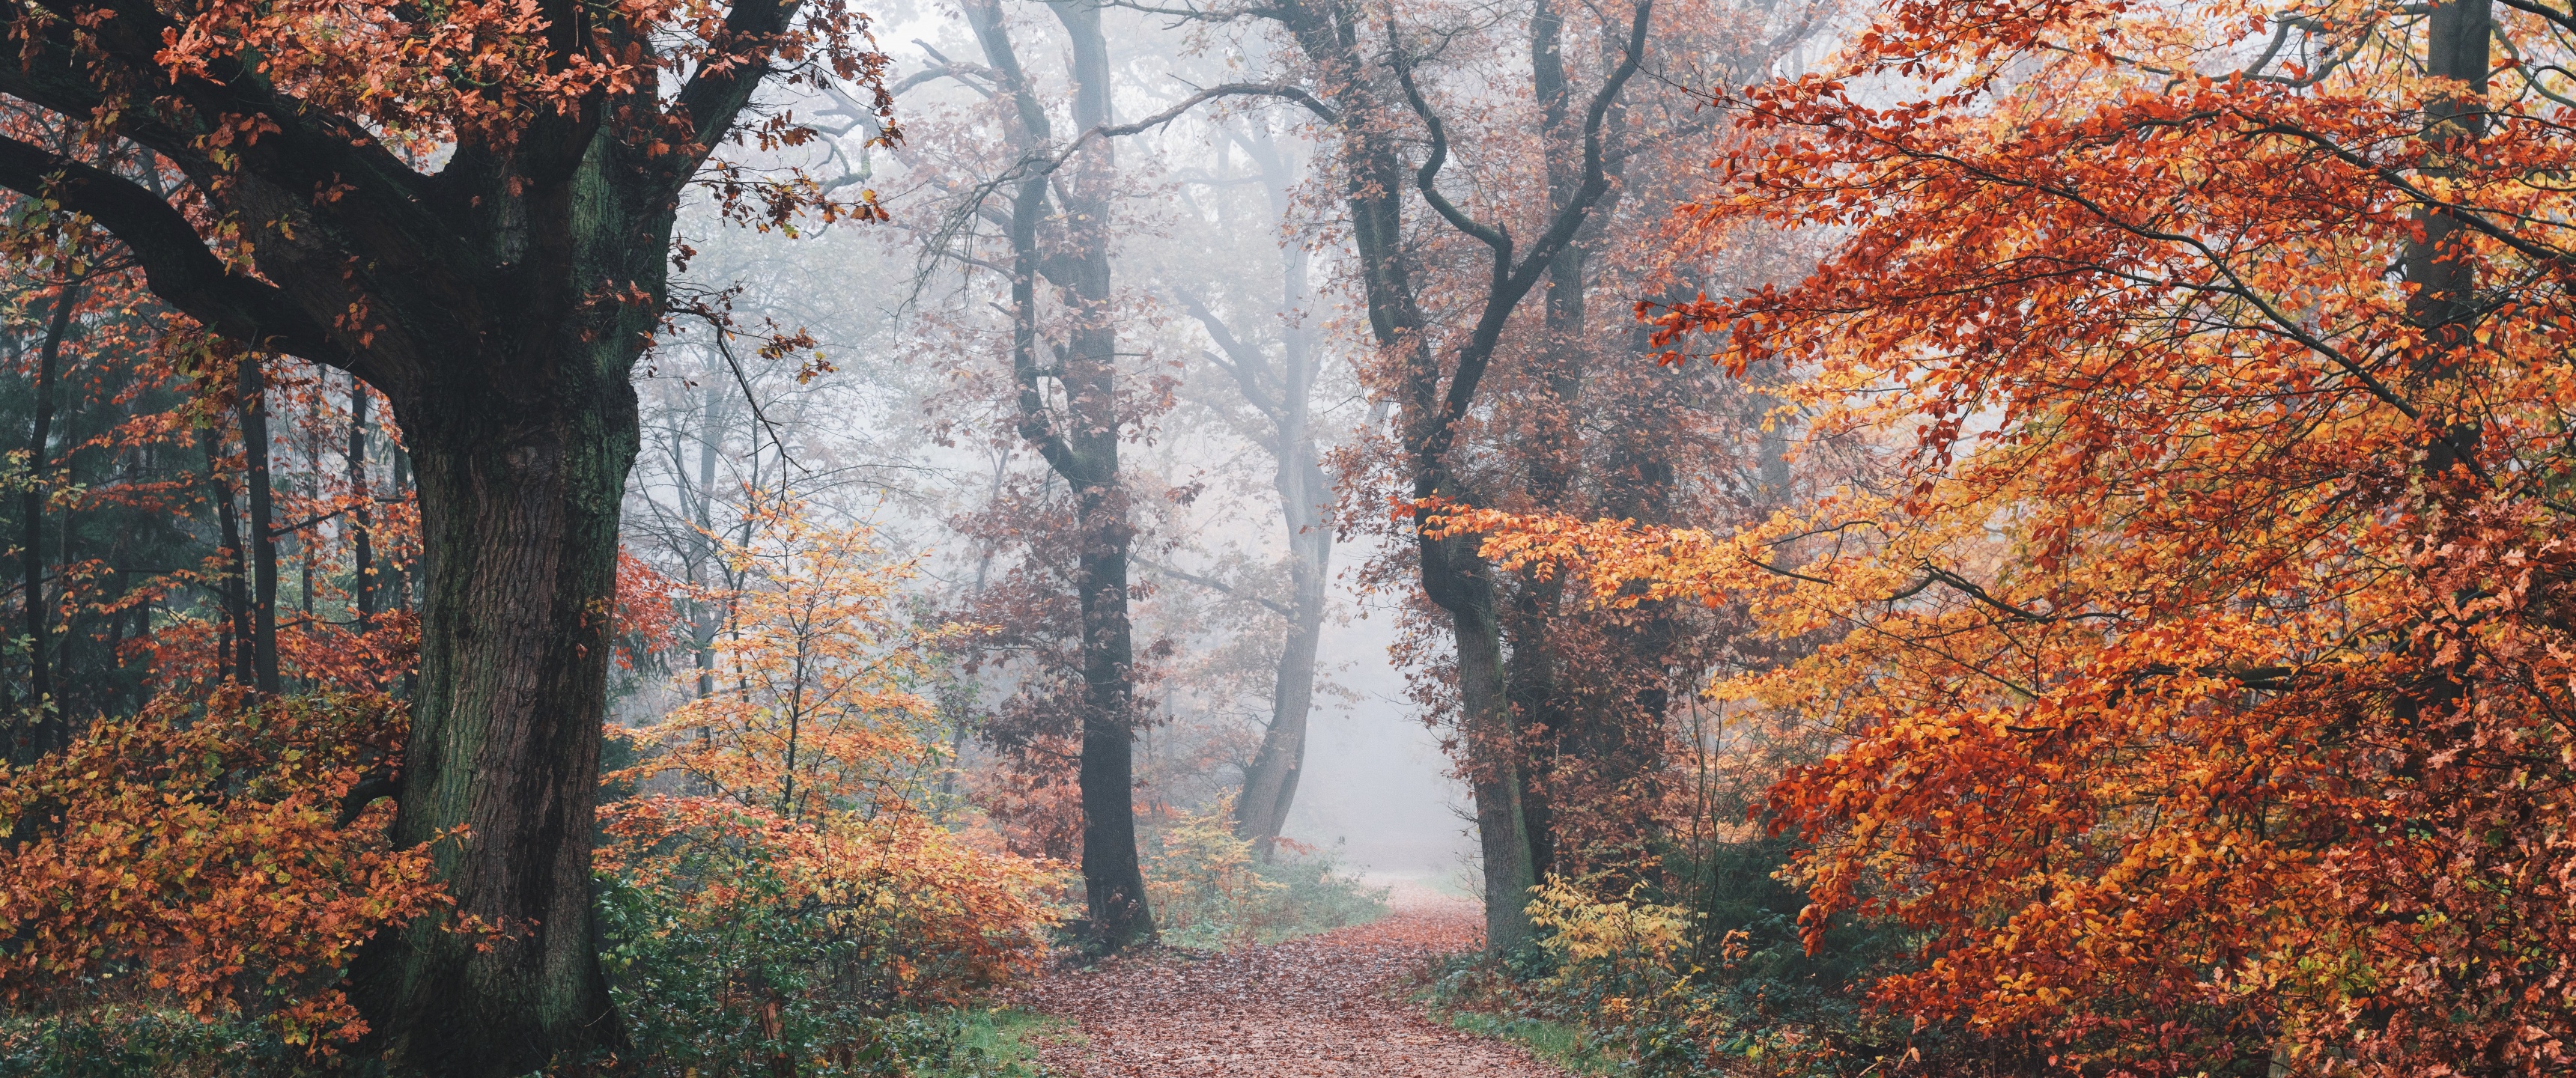 Autumn Forest Landscape Colorful Foliage On Trees And Grass Shining On  Sunbeams Amazing Woodland Scenery Fall Beautiful Sunrays In Morning Forest  Stock Photo  Download Image Now  iStock